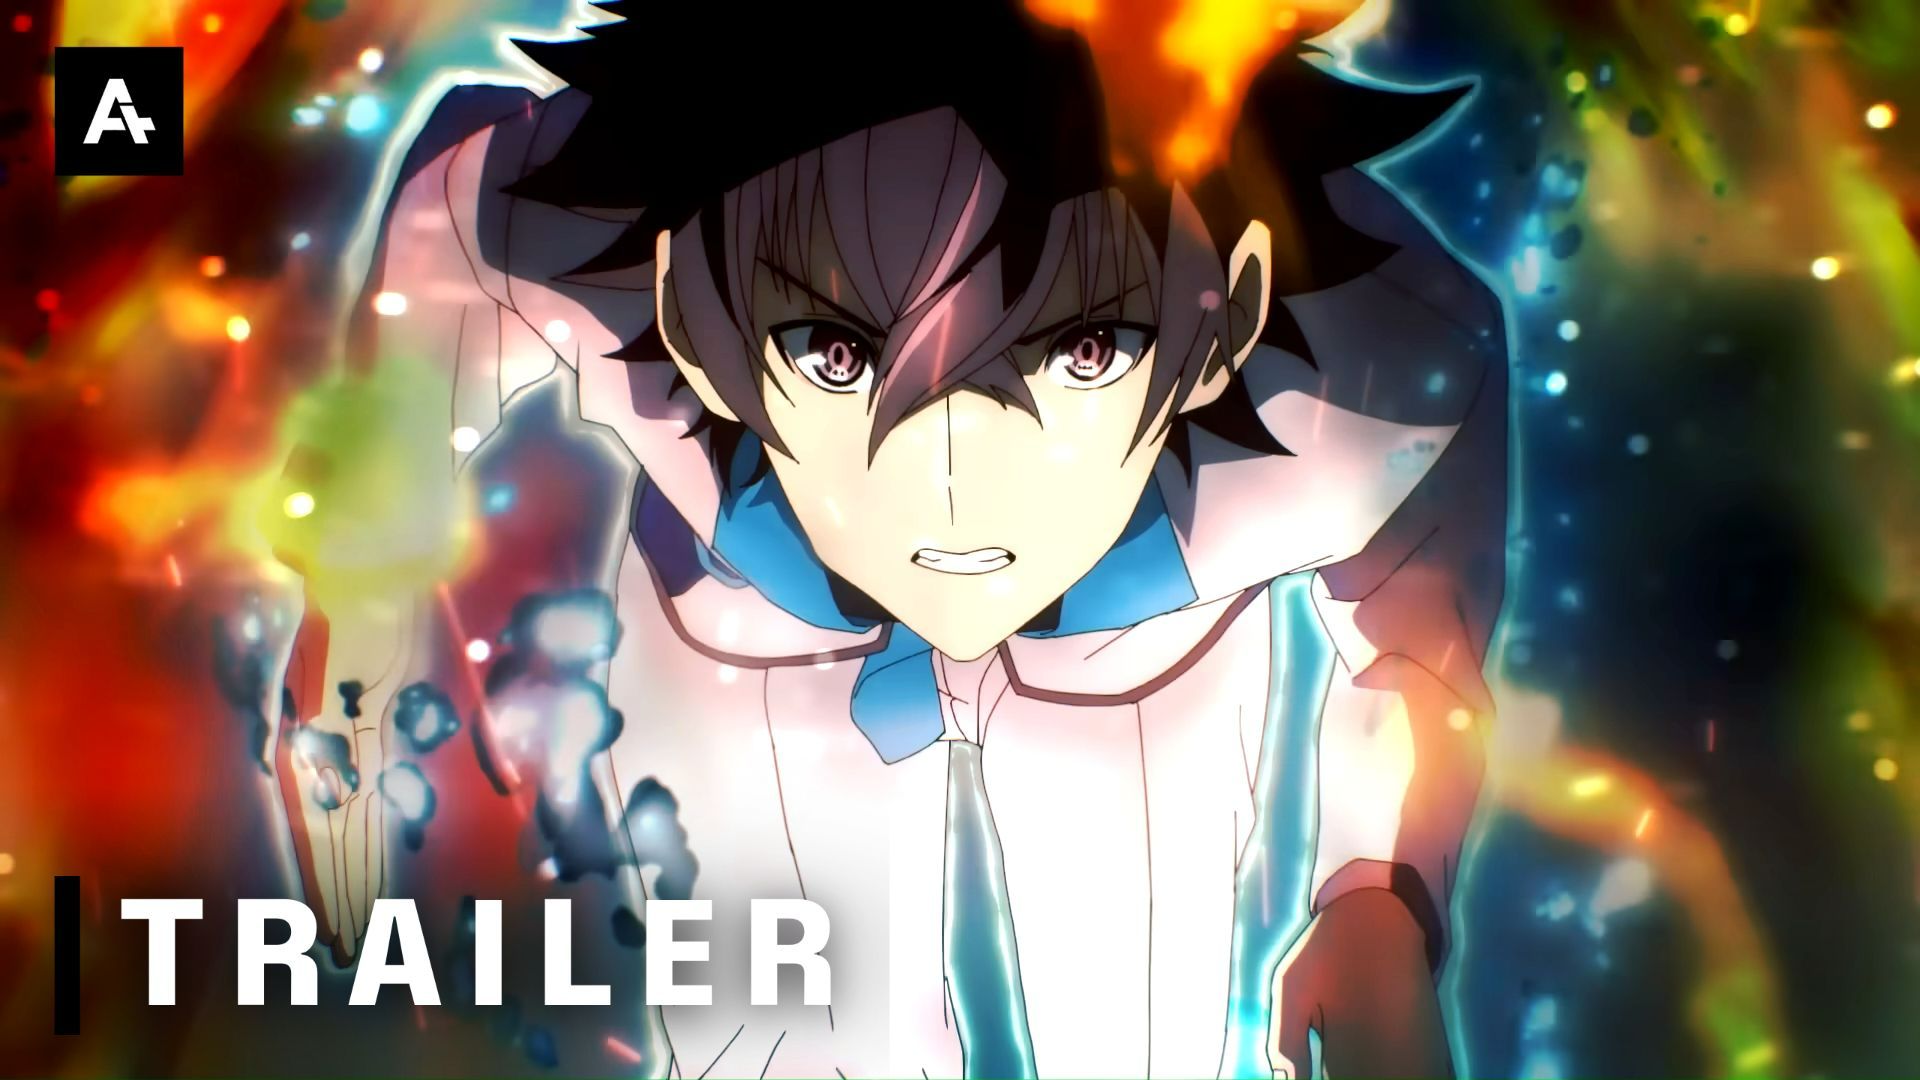 I Got a Cheat Skill in Another World and Became Unrivaled in The Real World,  Too - ANIME TRAILER 